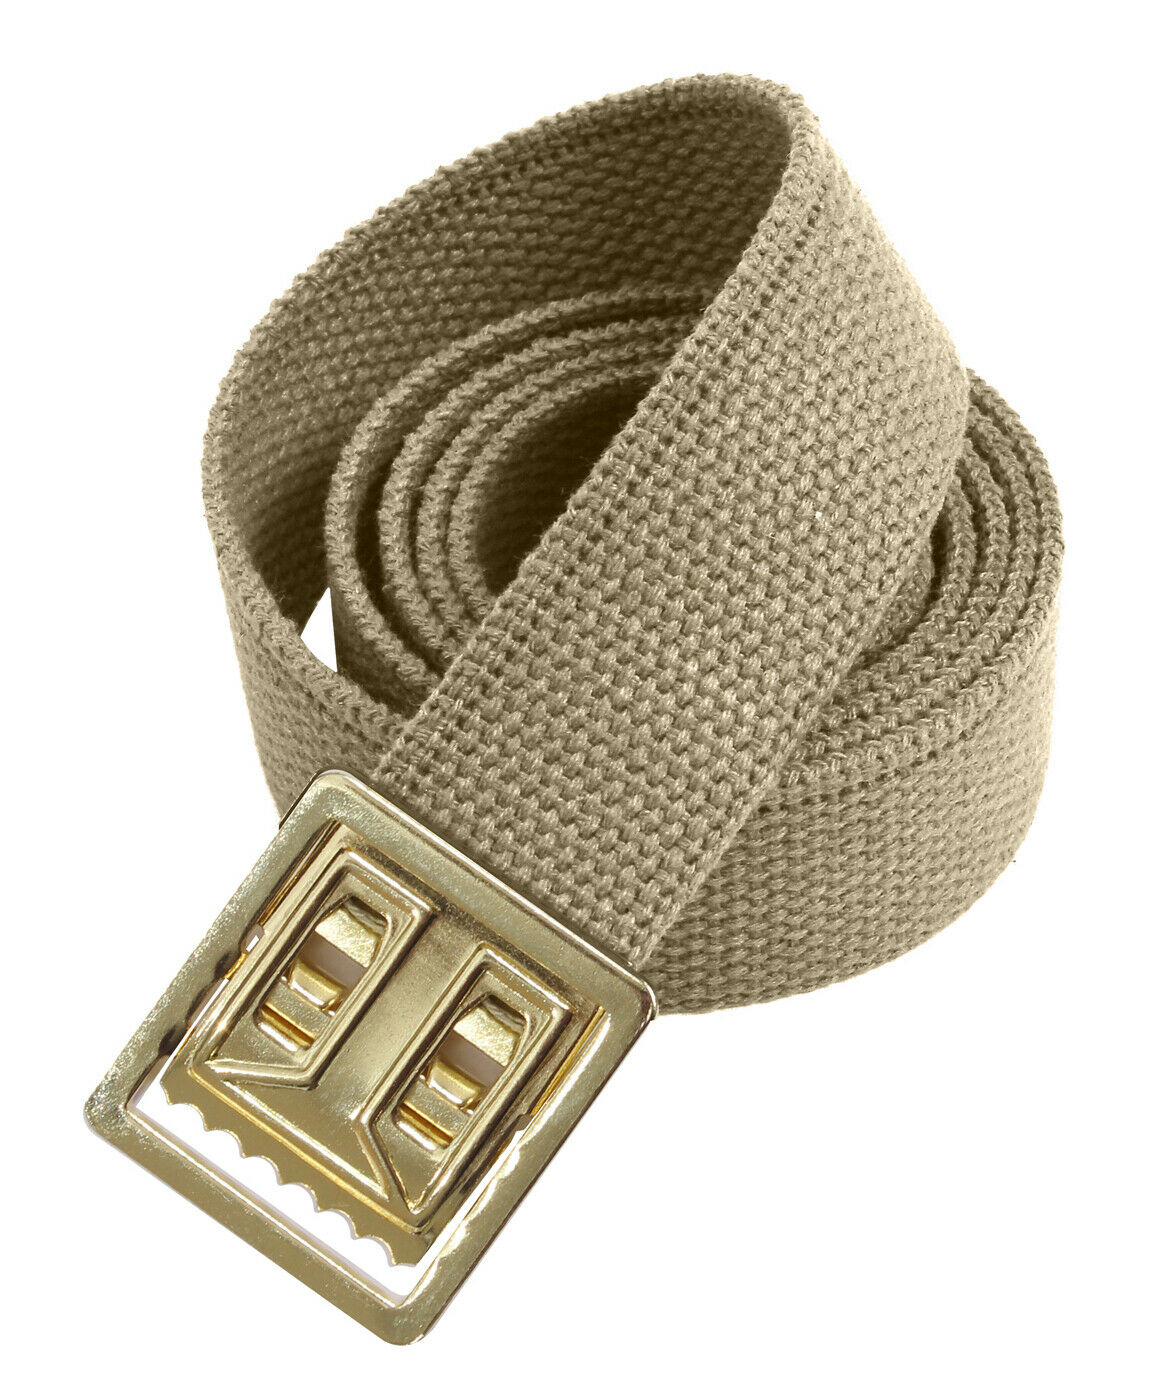 Rothco Military Web Belts With Open Face Buckle Black Coyote Olive Khaki Belt